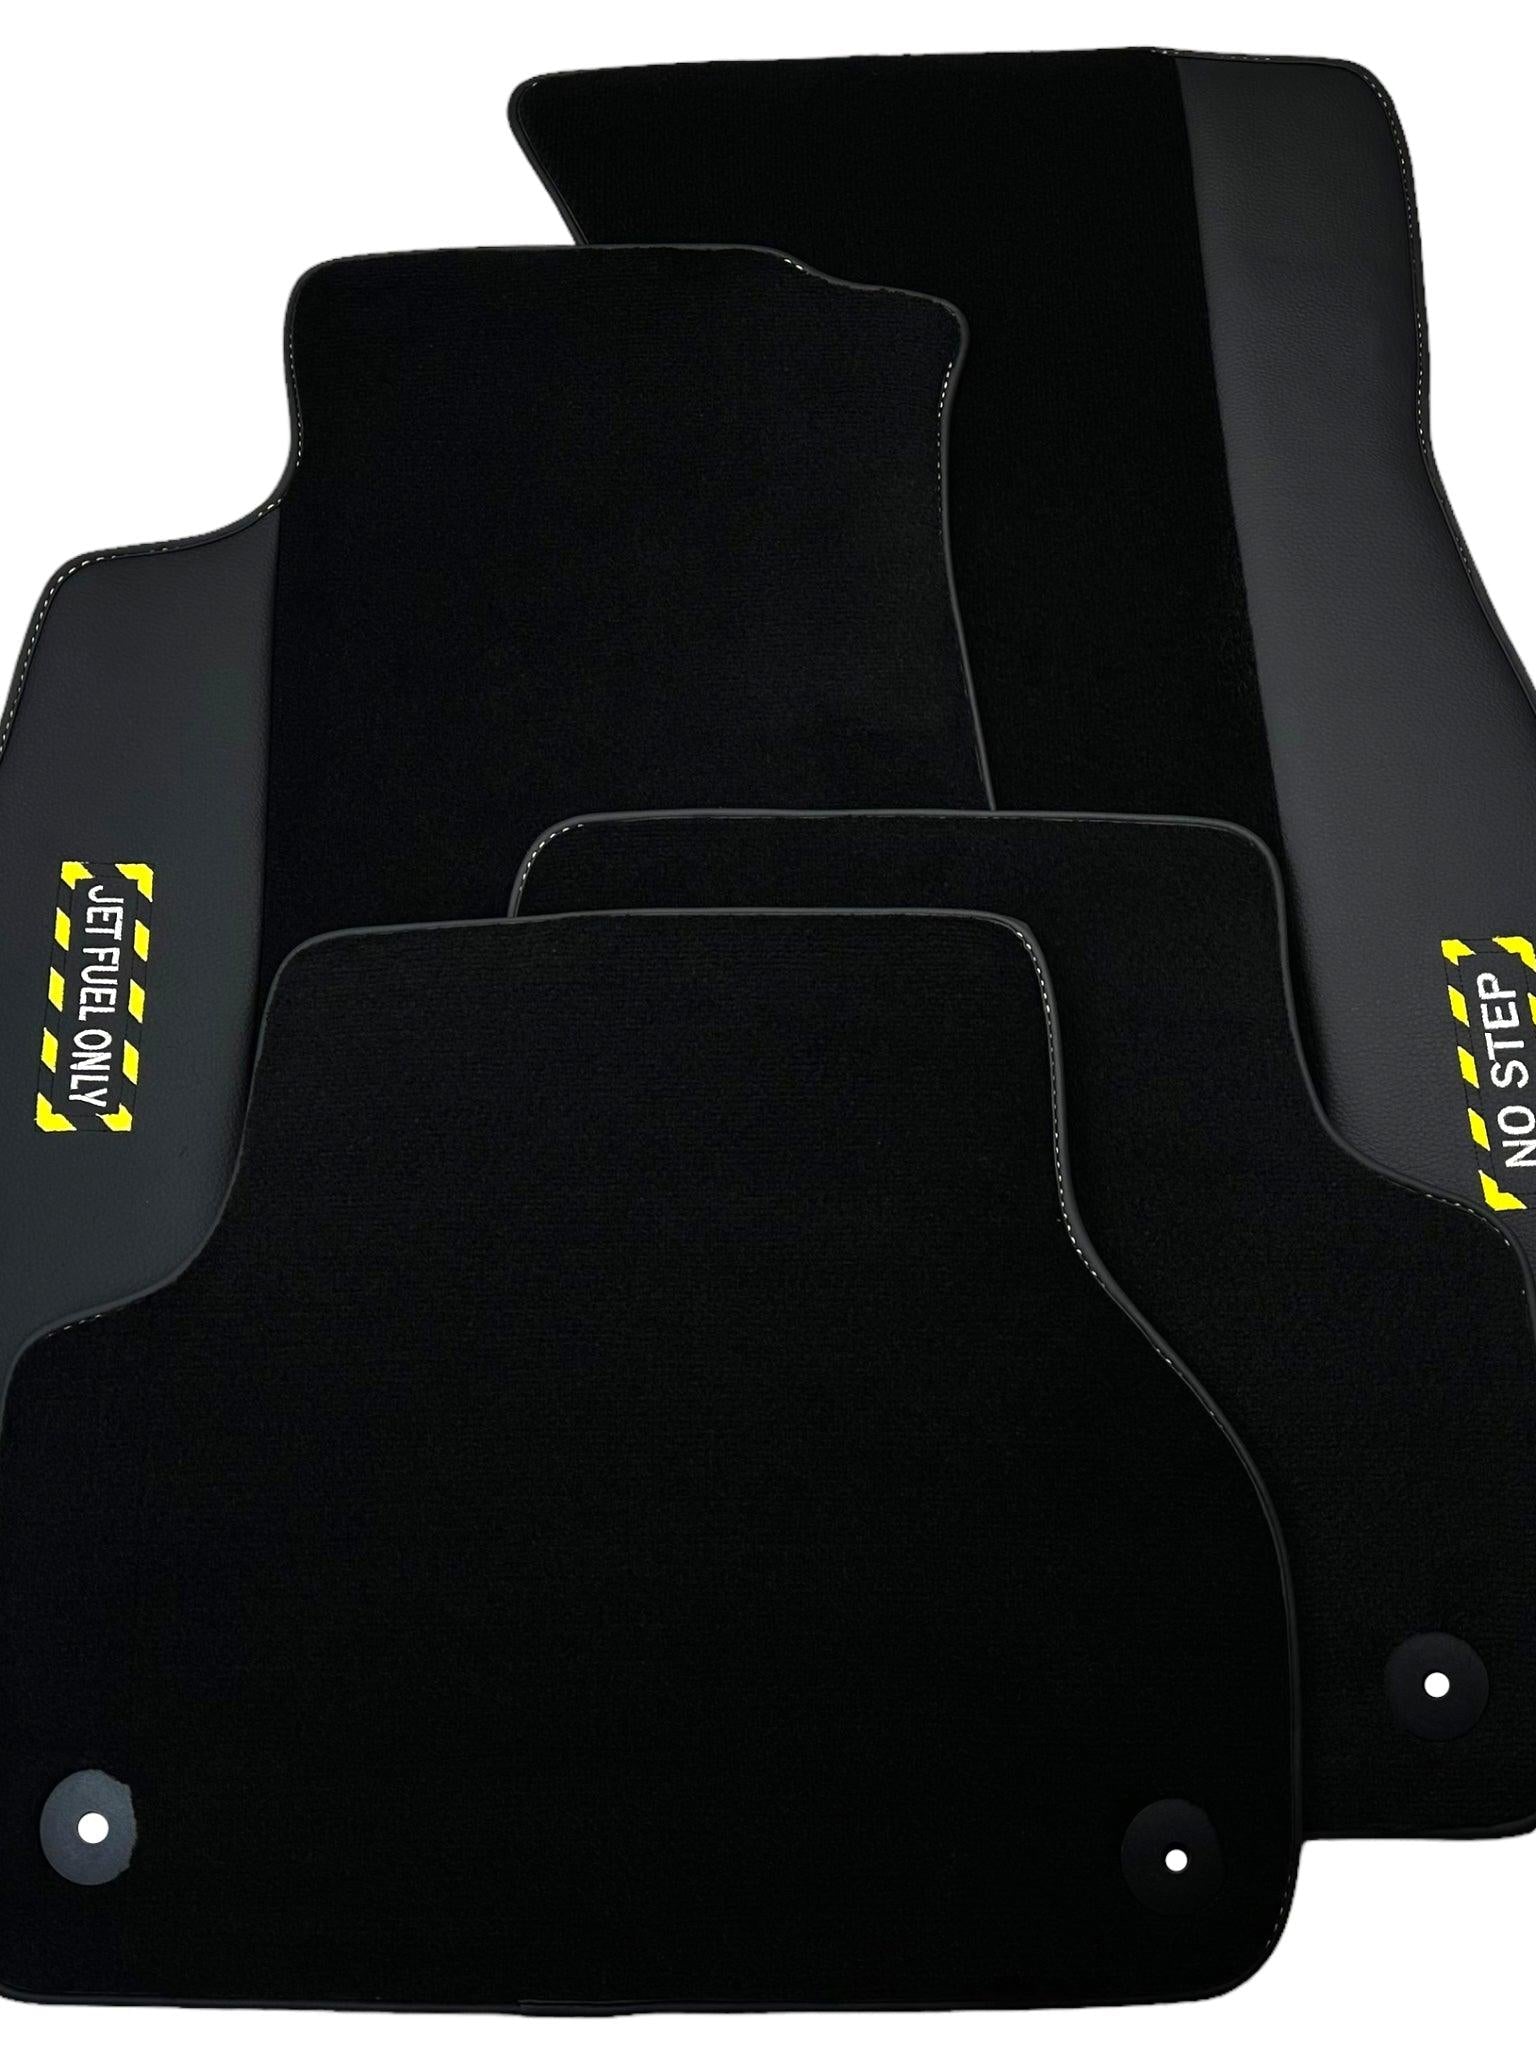 Black Floor Mats for Audi A3 - Convertible (2008-2013) | Fighter Jet Edition